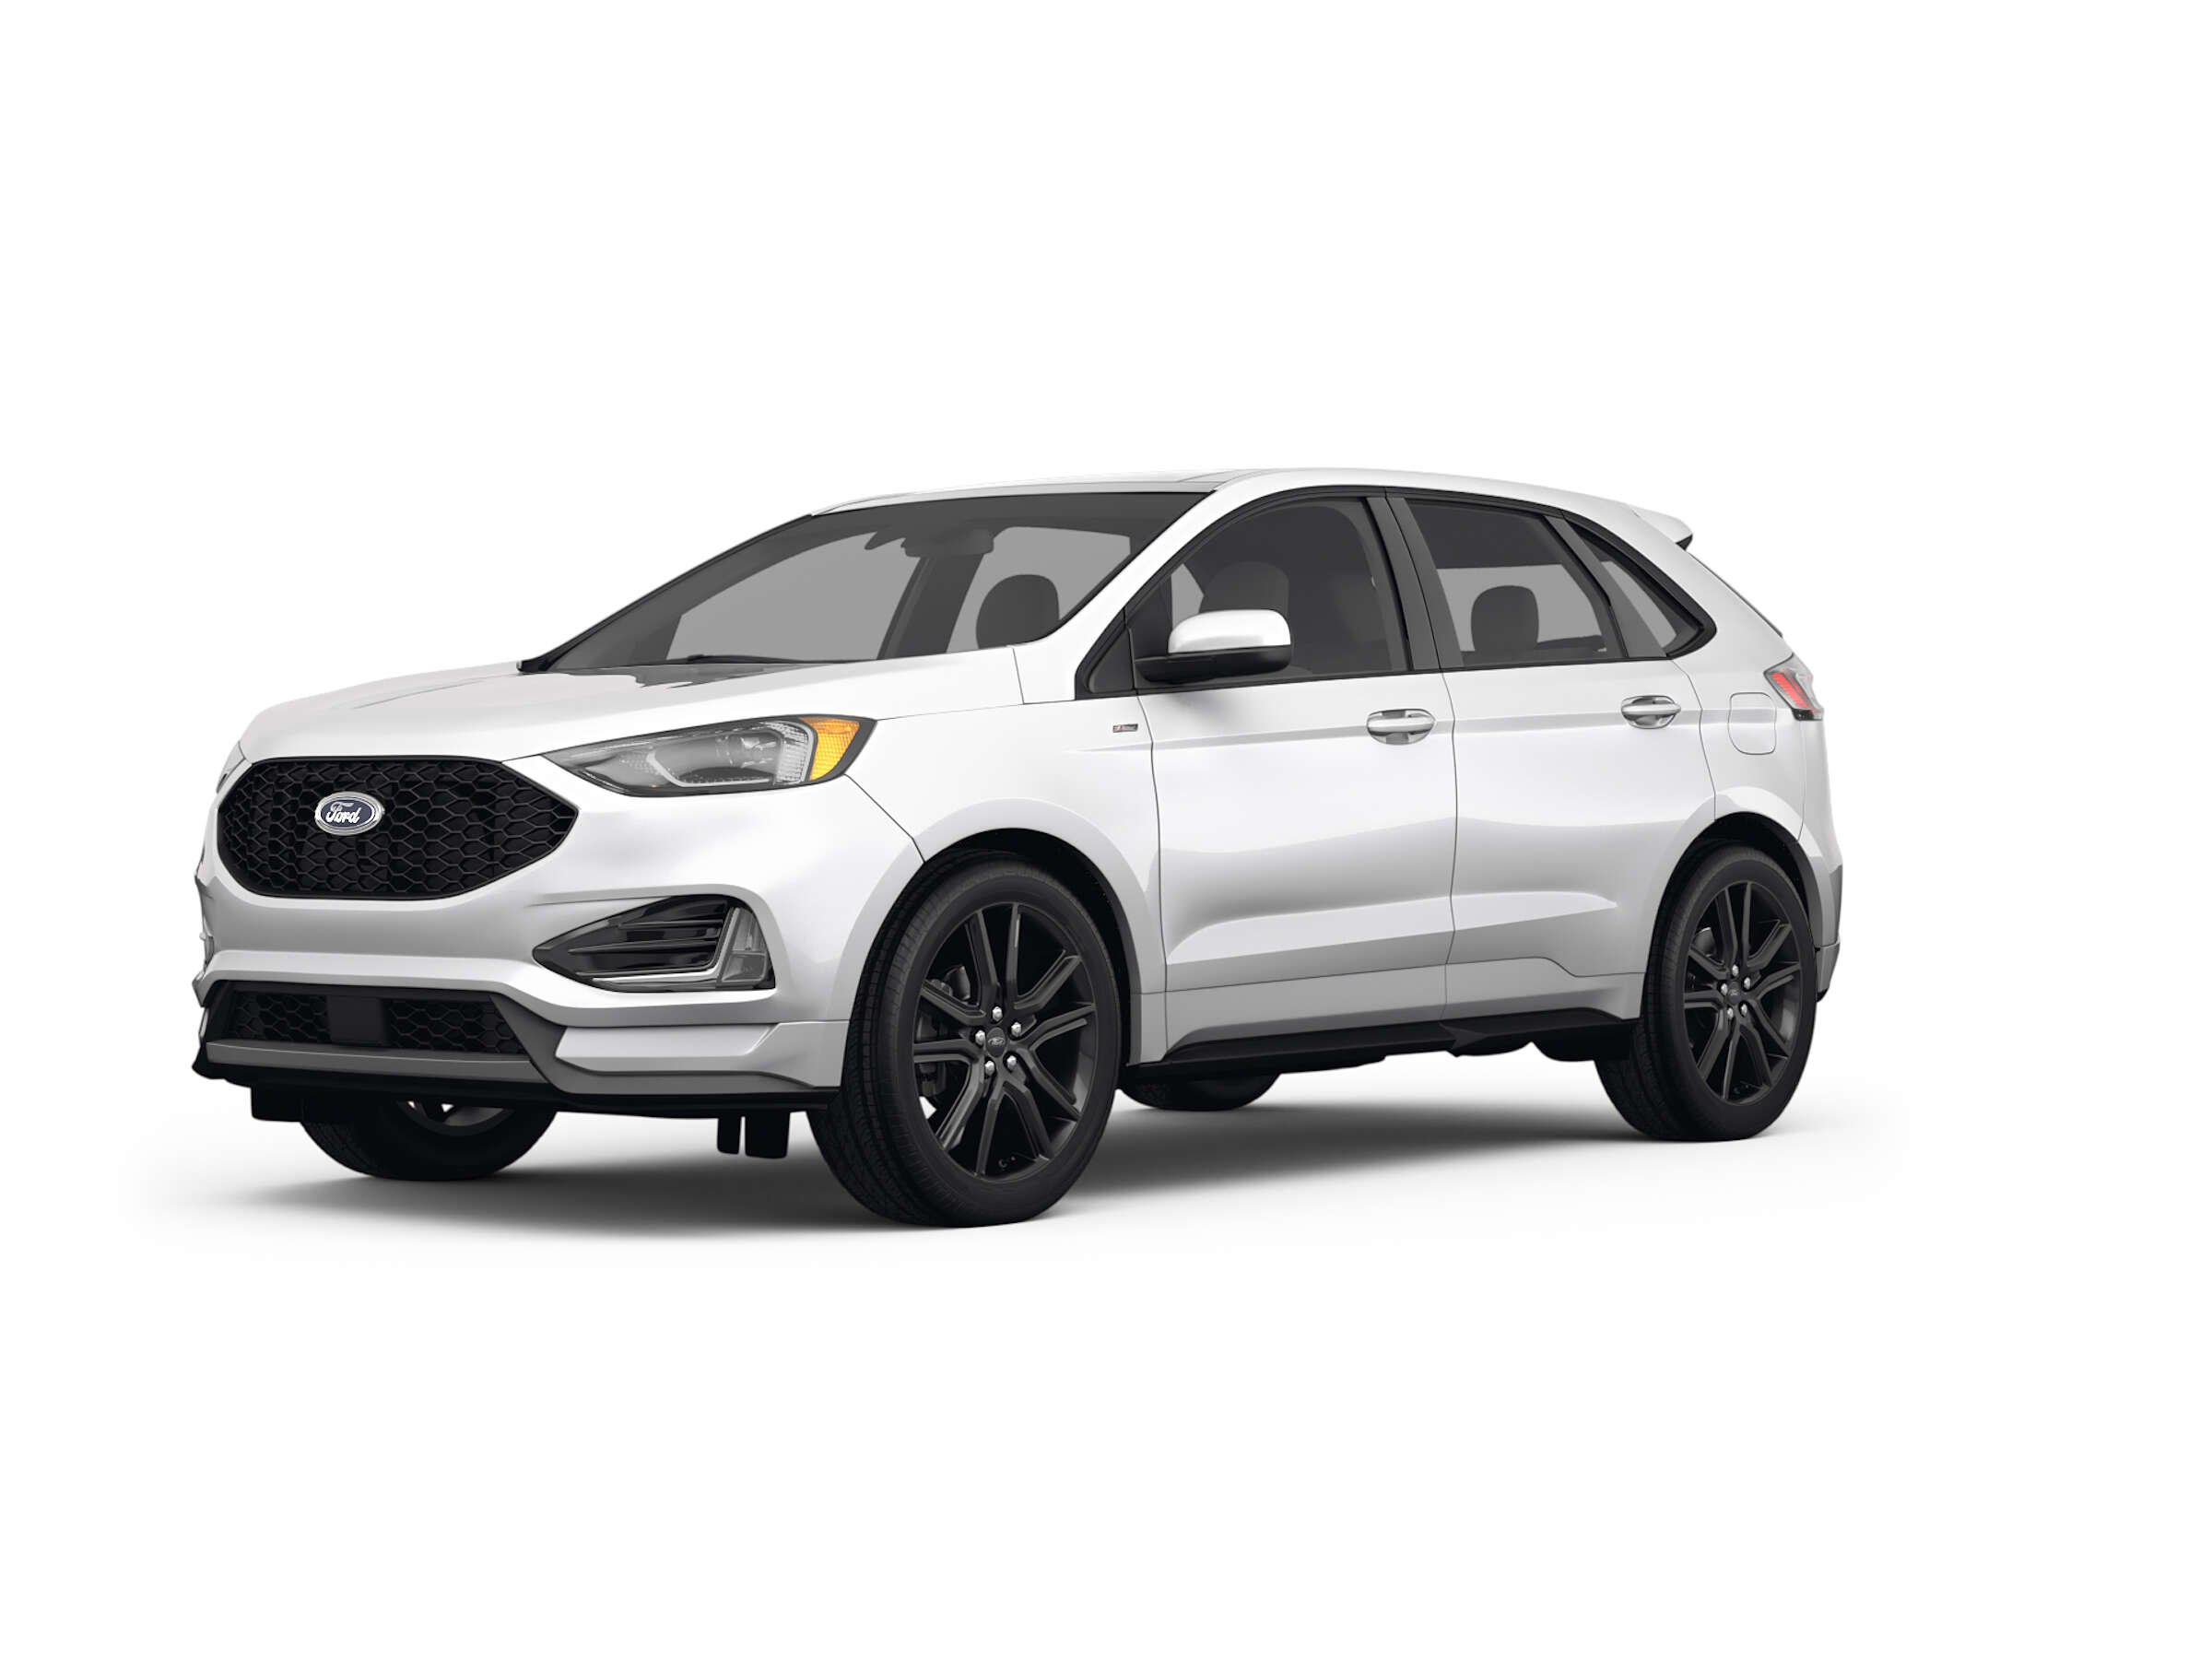 Ford Edge for sale in Franklin, Tennessee